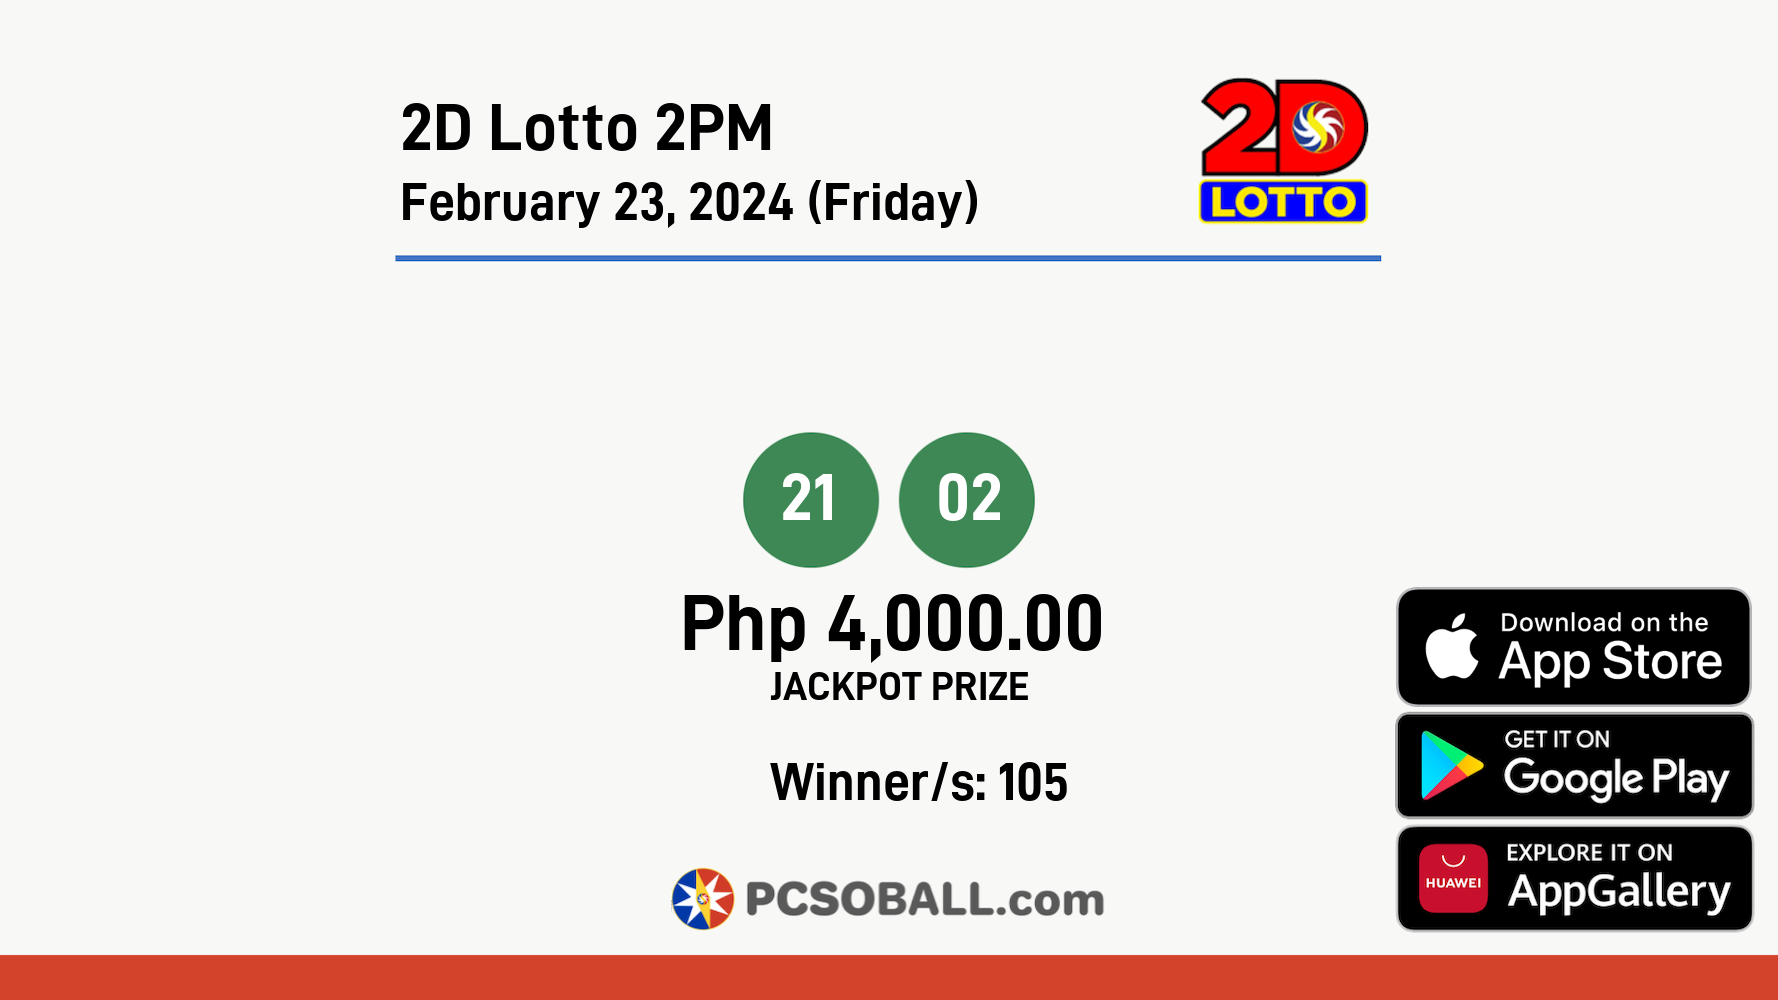 2D Lotto 2PM February 23, 2024 (Friday) Result